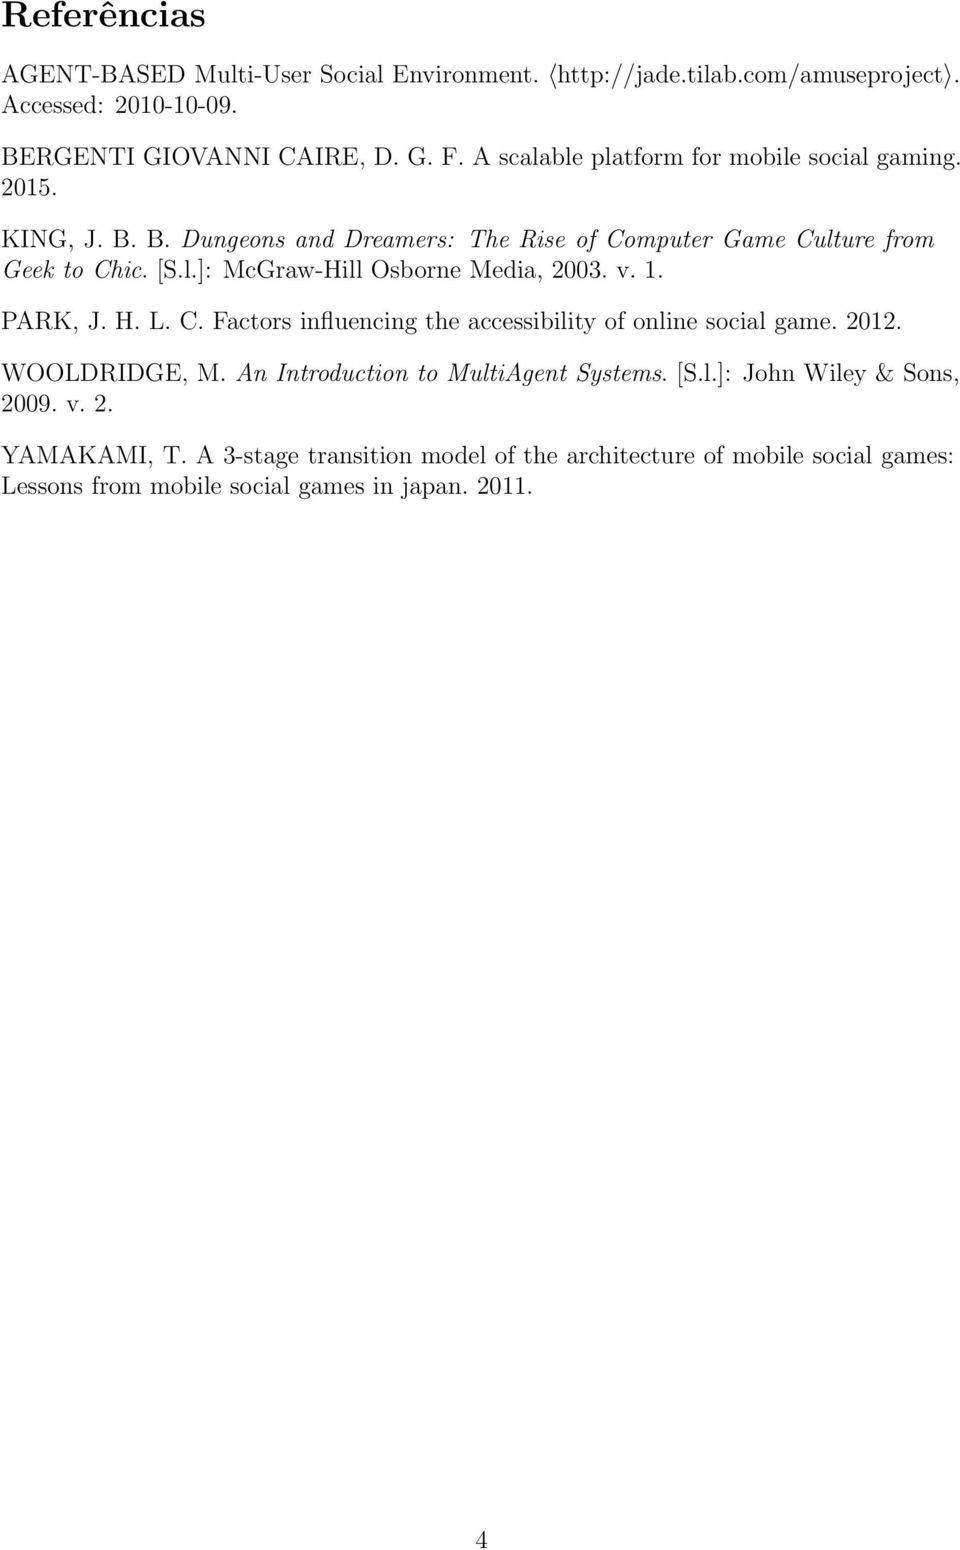 v. 1. PARK, J. H. L. C. Factors influencing the accessibility of online social game. 2012. WOOLDRIDGE, M. An Introduction to MultiAgent Systems. [S.l.]: John Wiley & Sons, 2009.